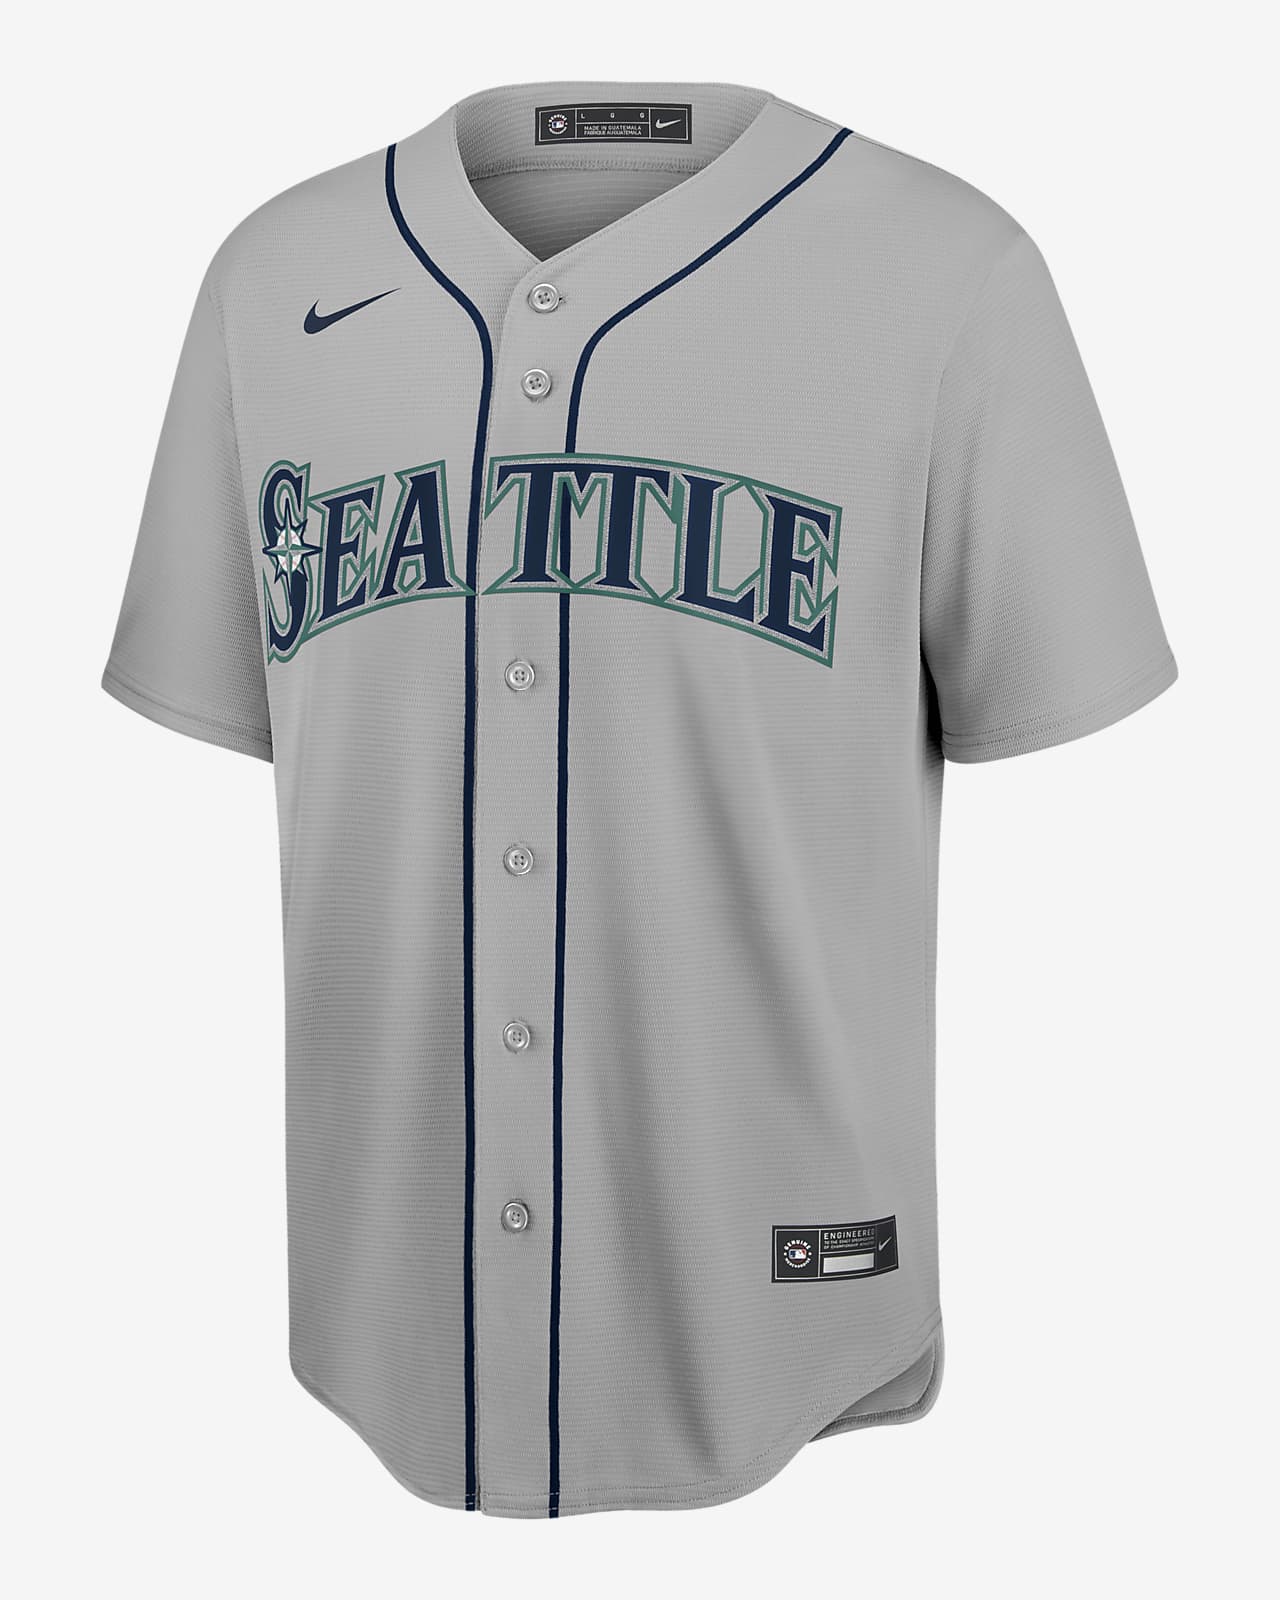 Seattle Mariners rumor: Total rebrand with new logos and uniforms in 2021?